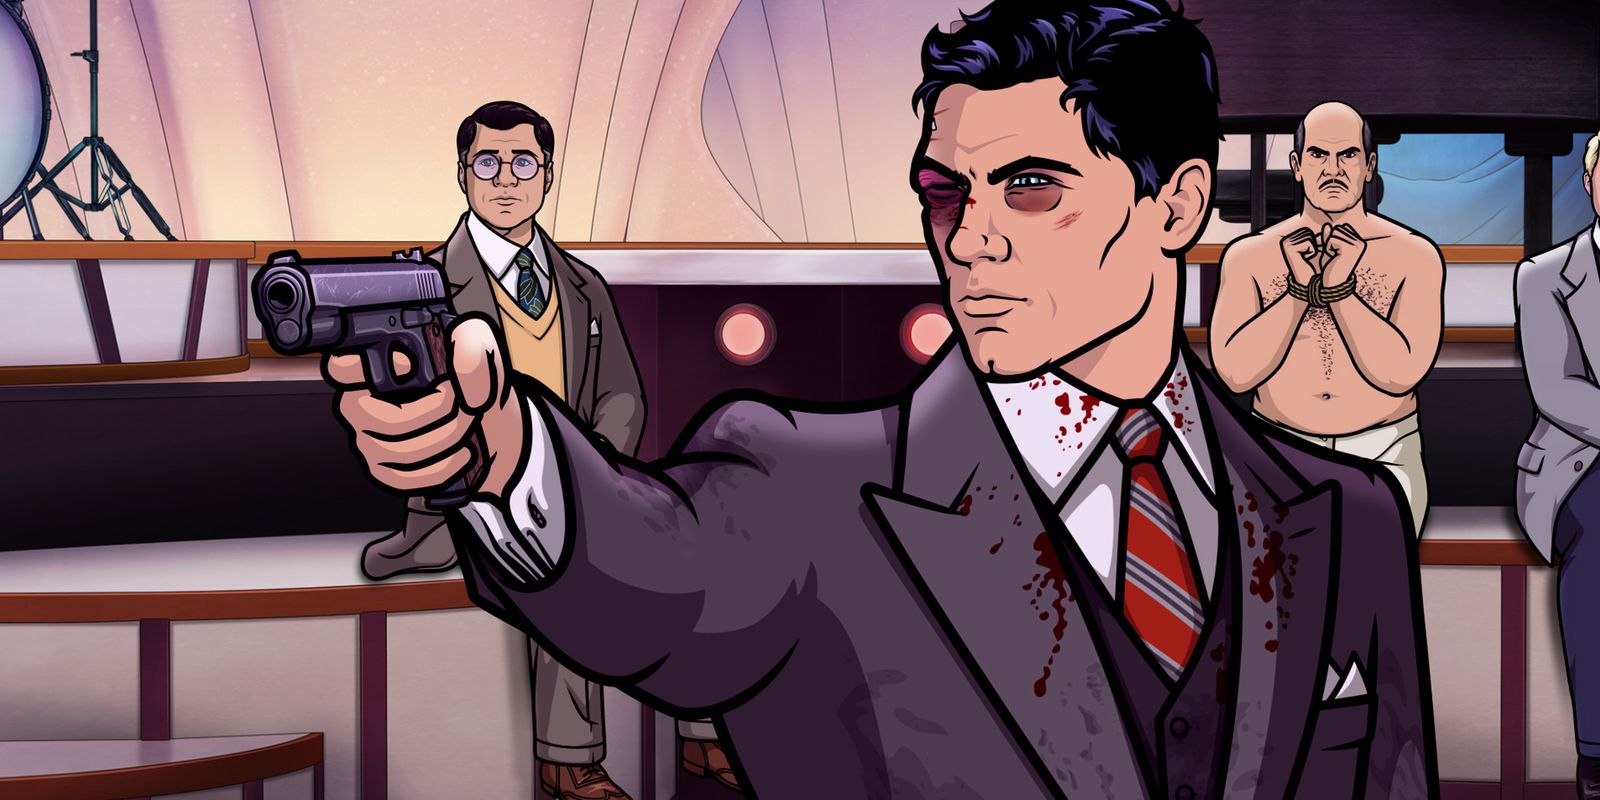 Archer points a gun as others watch in the background